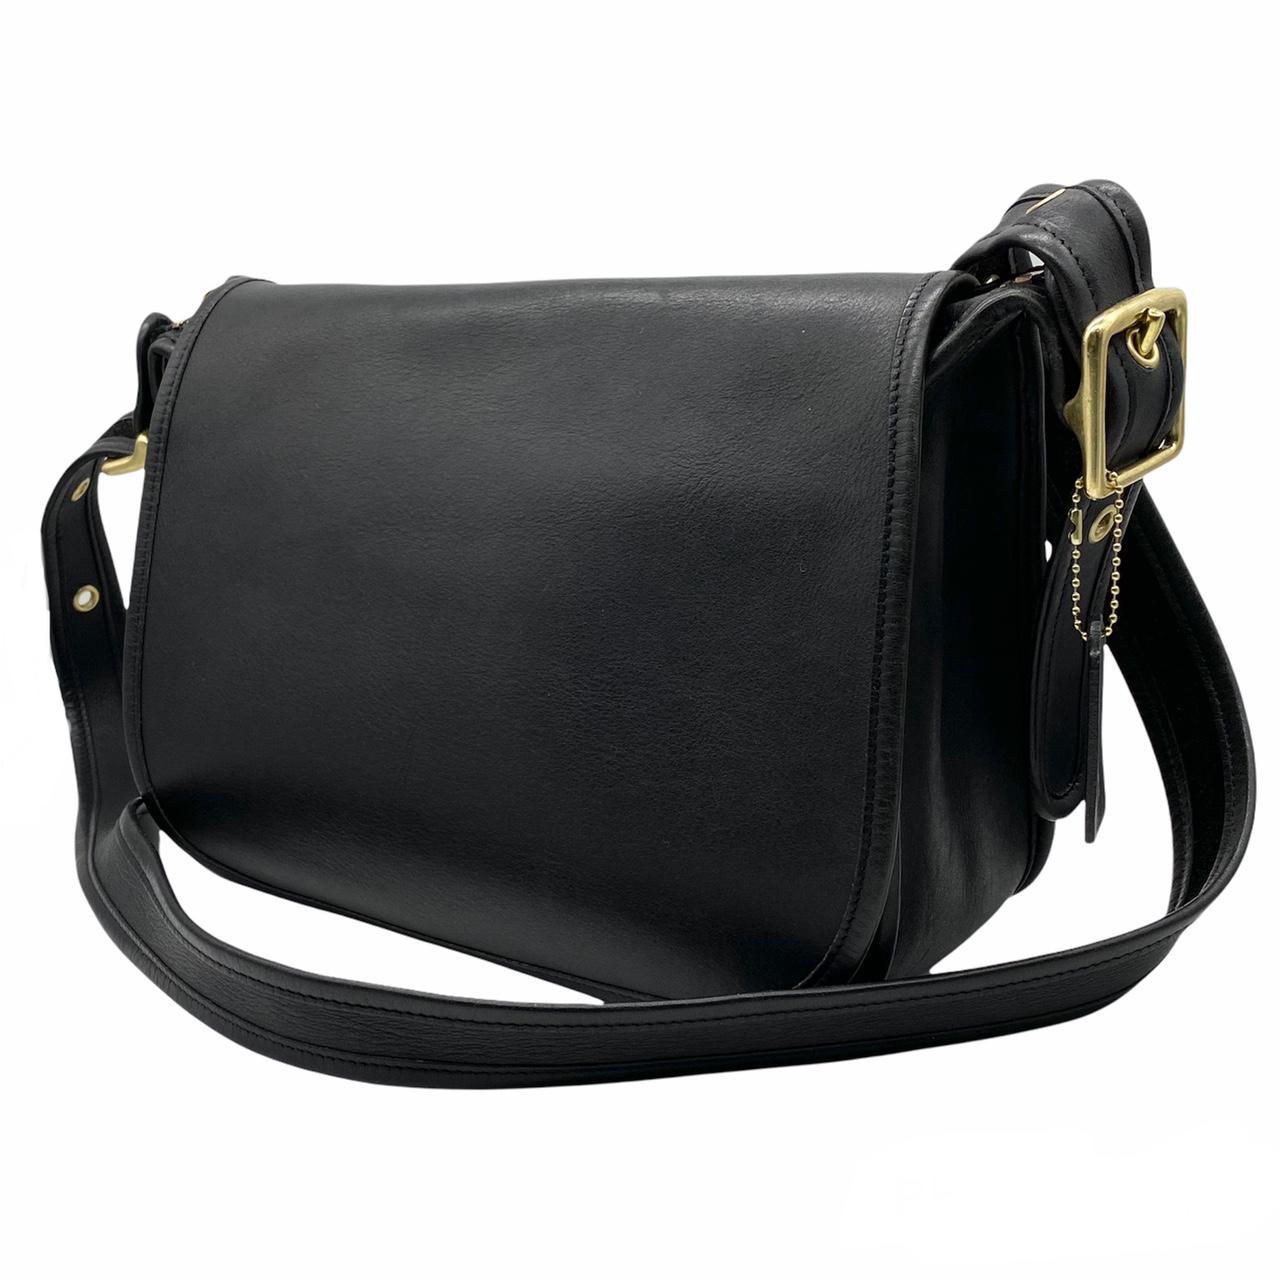 Coach Women's Black and Gold Bag